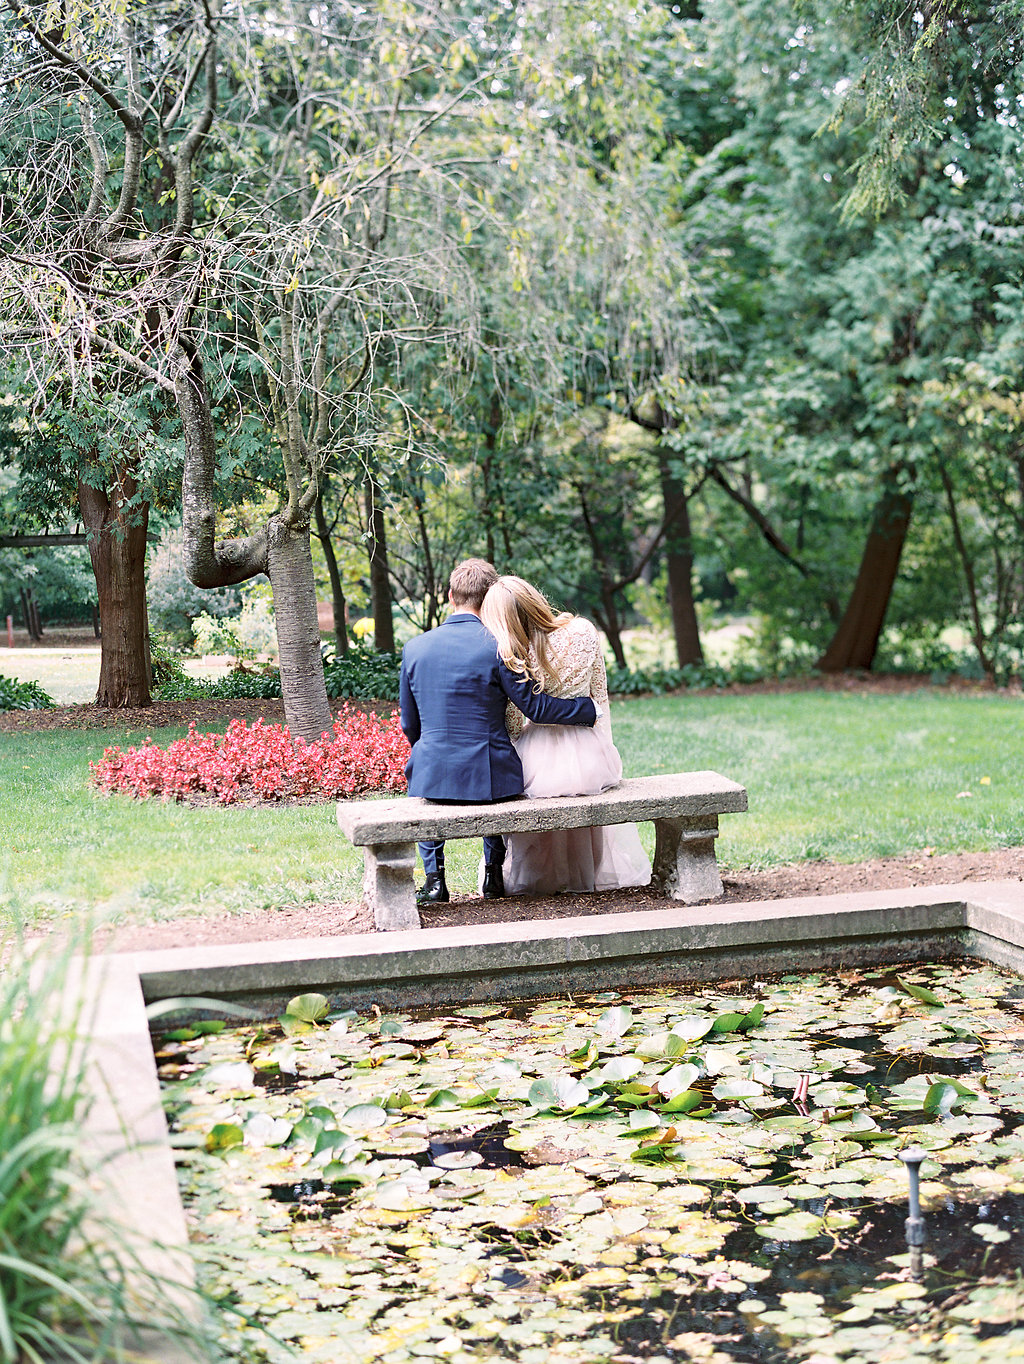 Garden Engagment Session | The Day's Design | Ashley Slater Photography